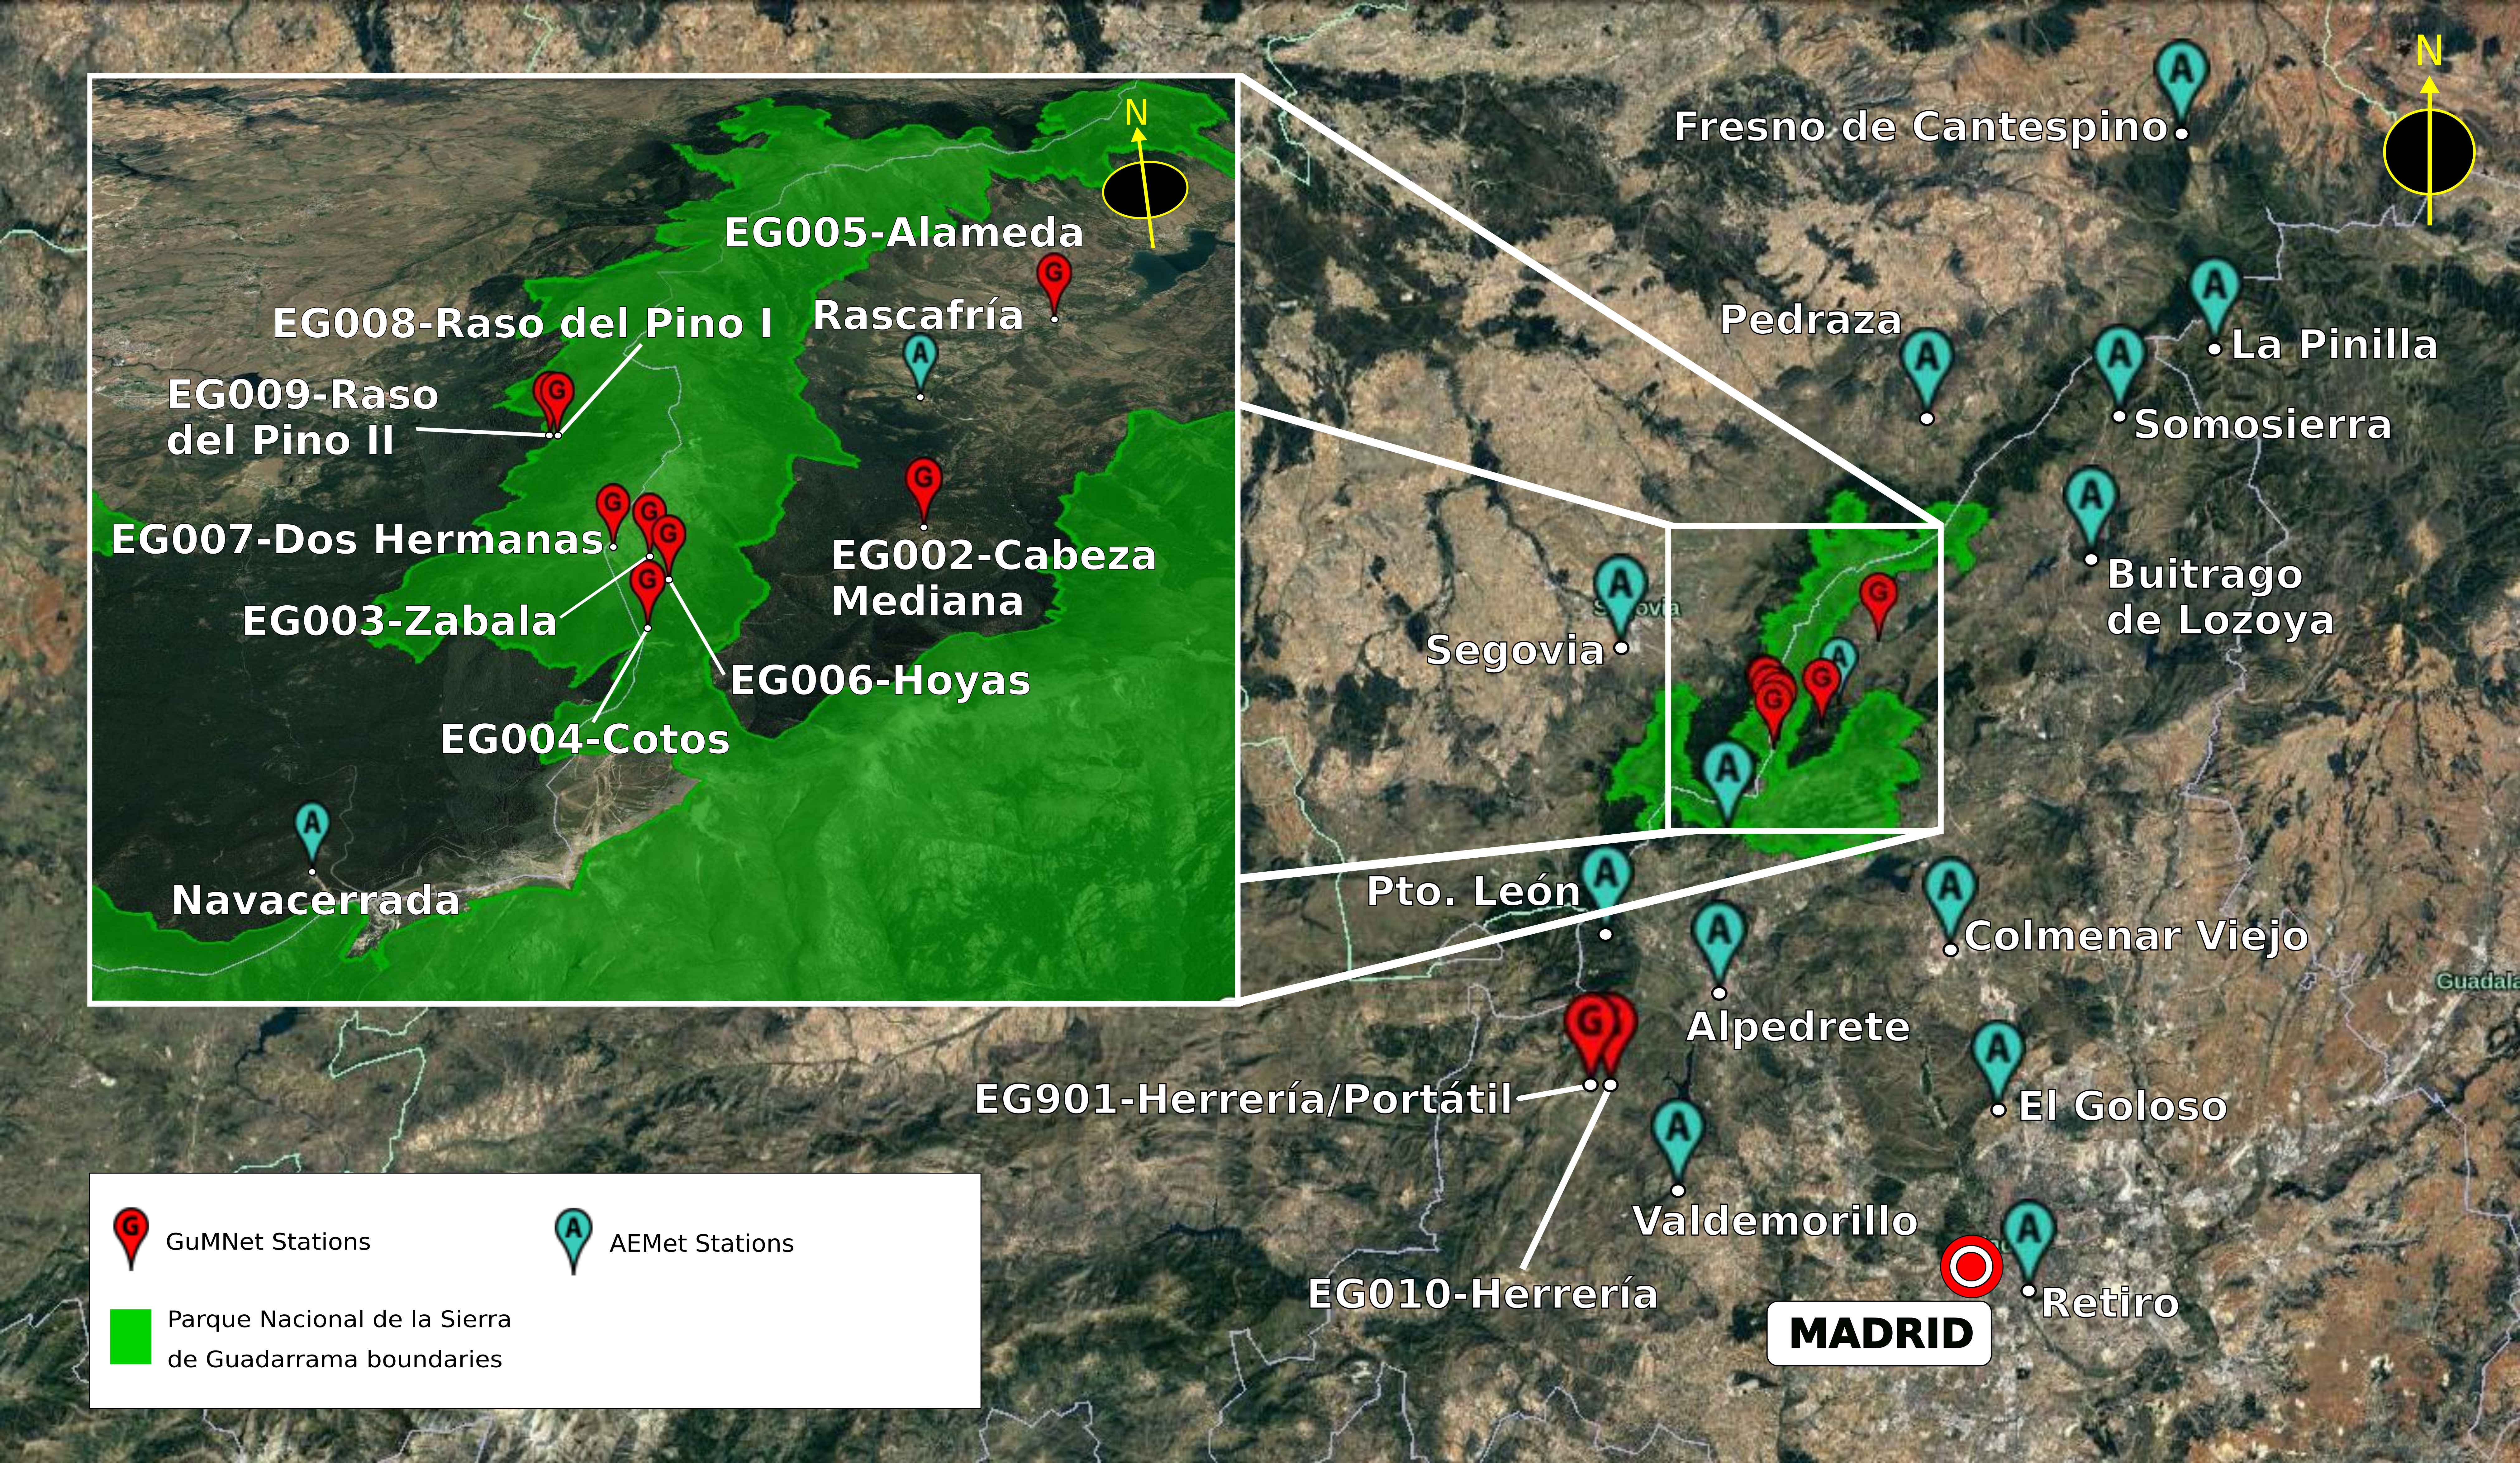 Spatial distribution of GuMNet stations across the Sierra de Guadarrama and other meteorological stations of the area.